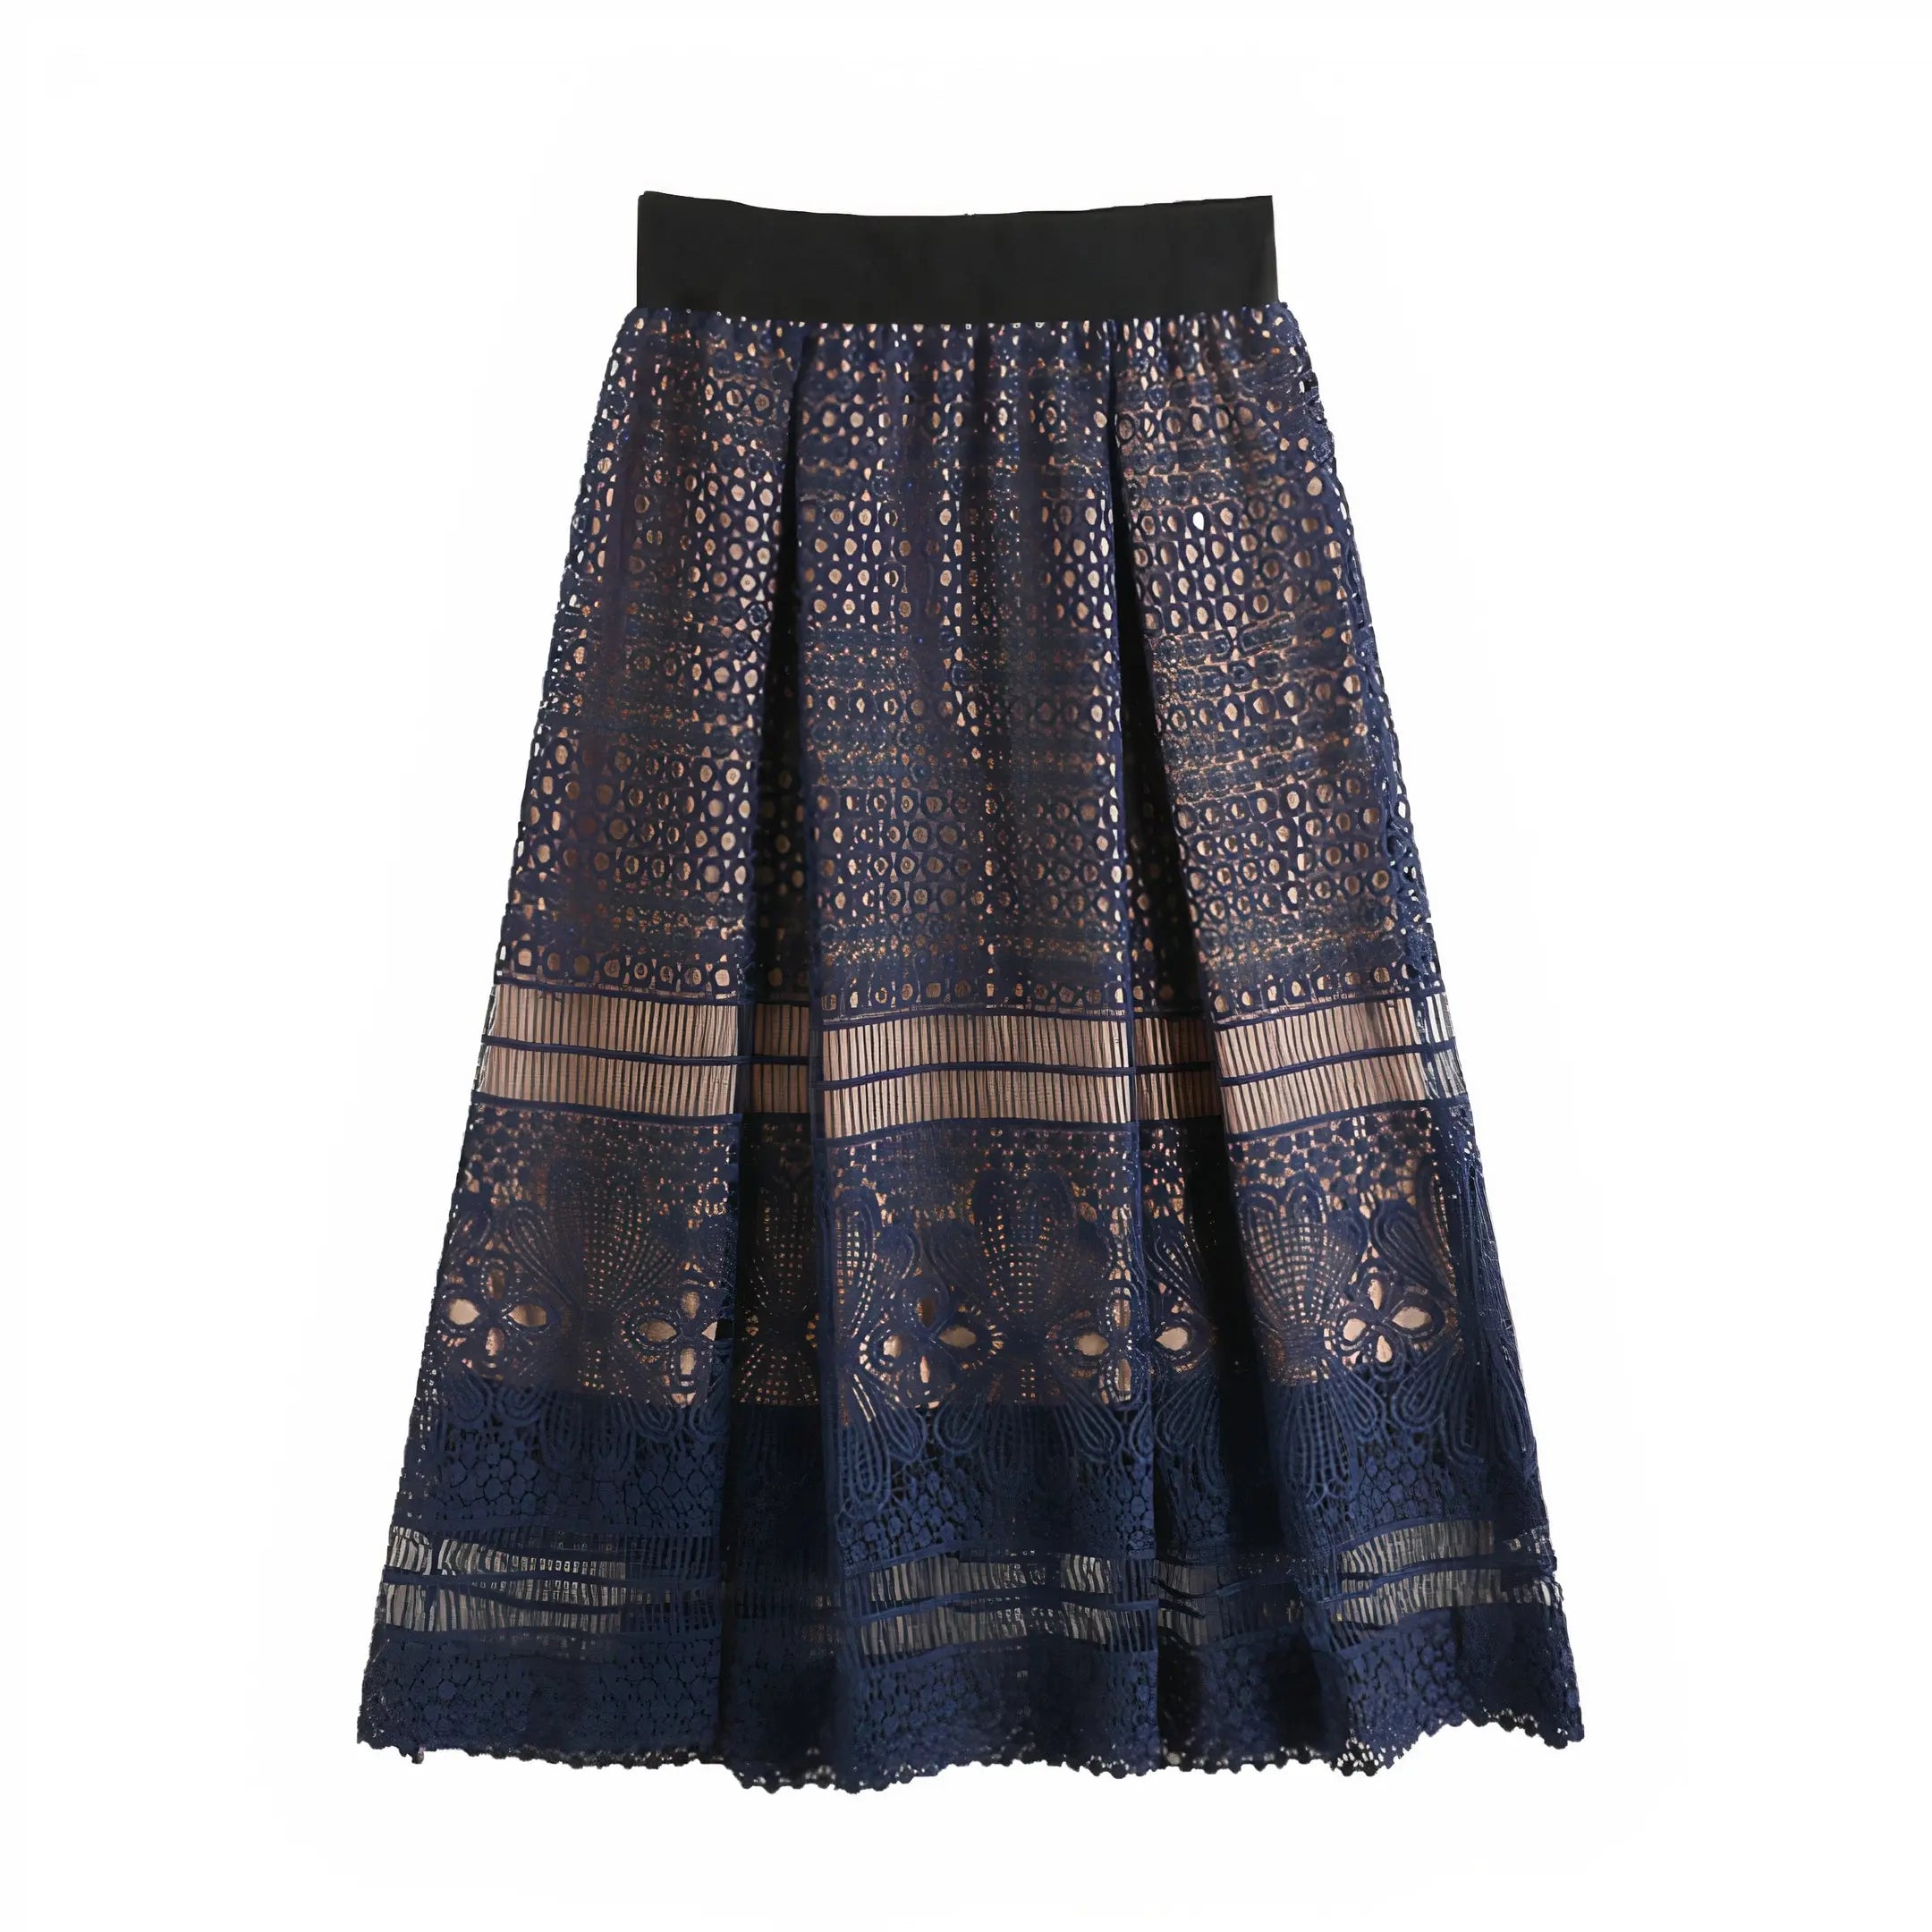 Halle Classic Lace Adjustable Skirt |   |  Casual Chic Boutique